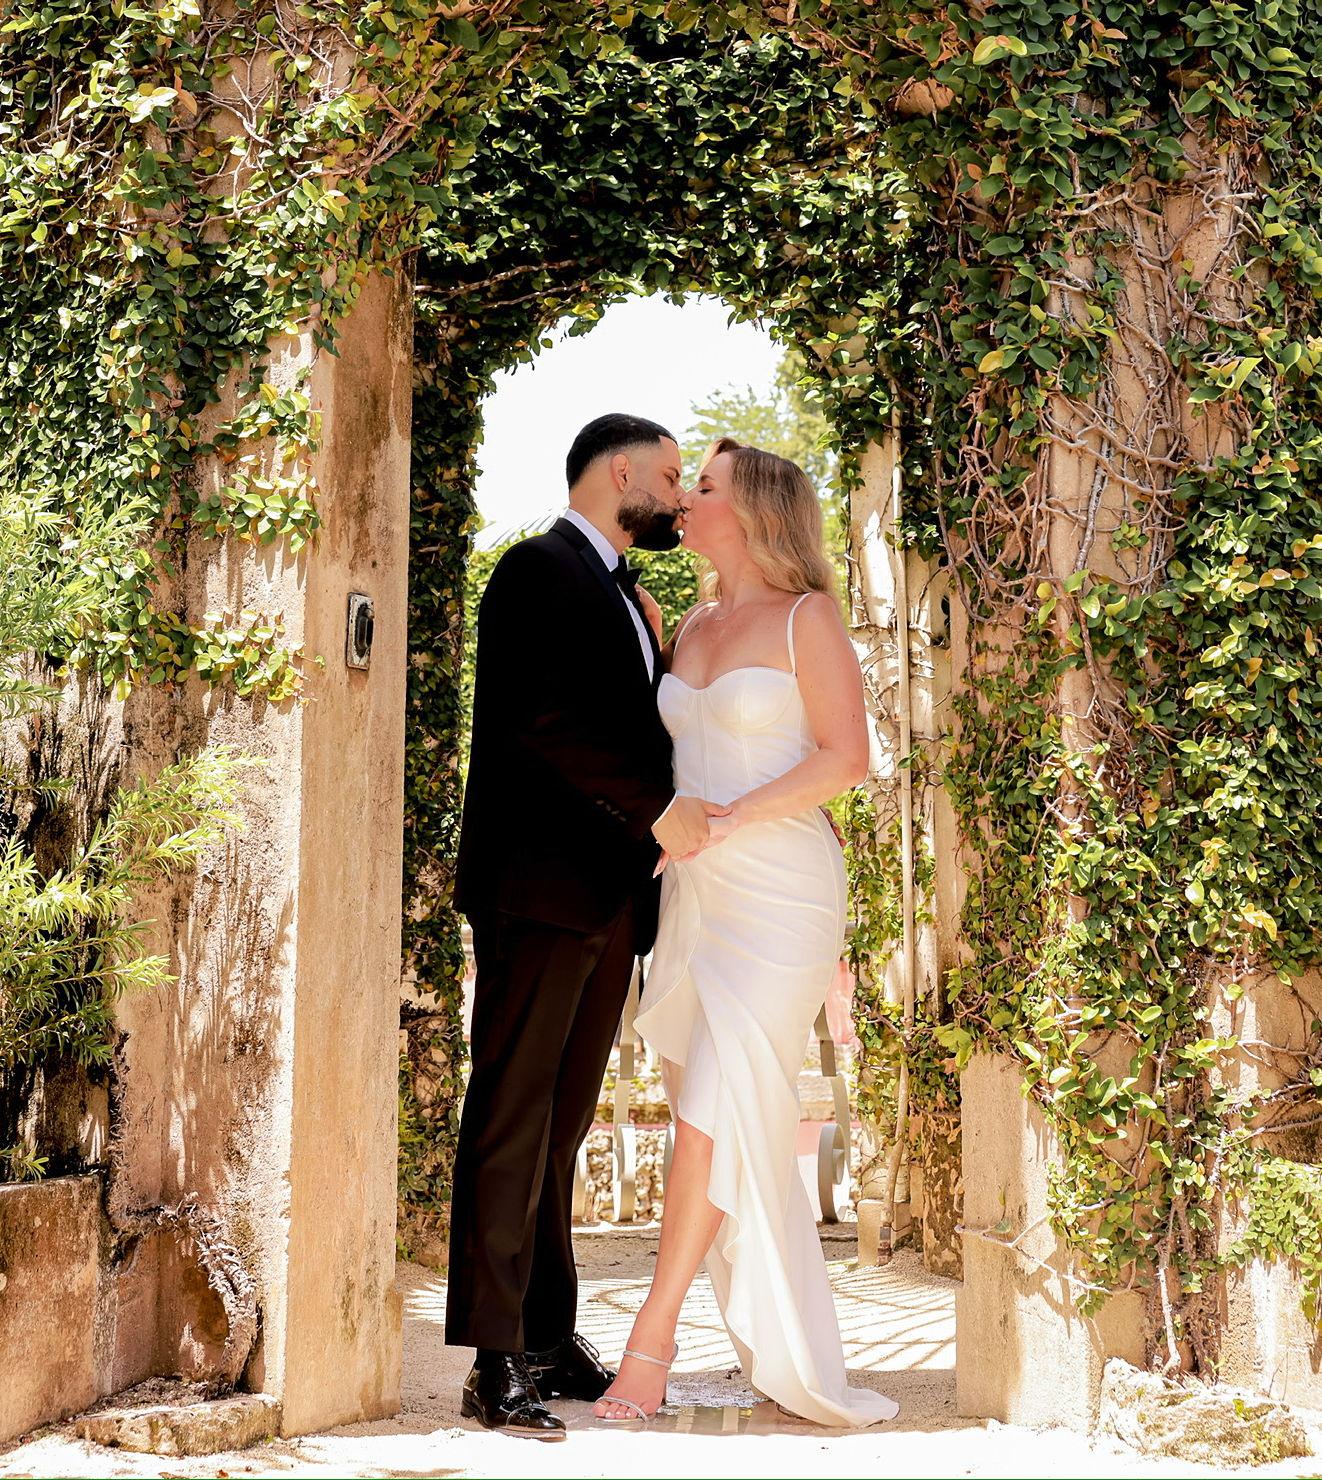 The Wedding Website of Serena Troise and Mario Caceres